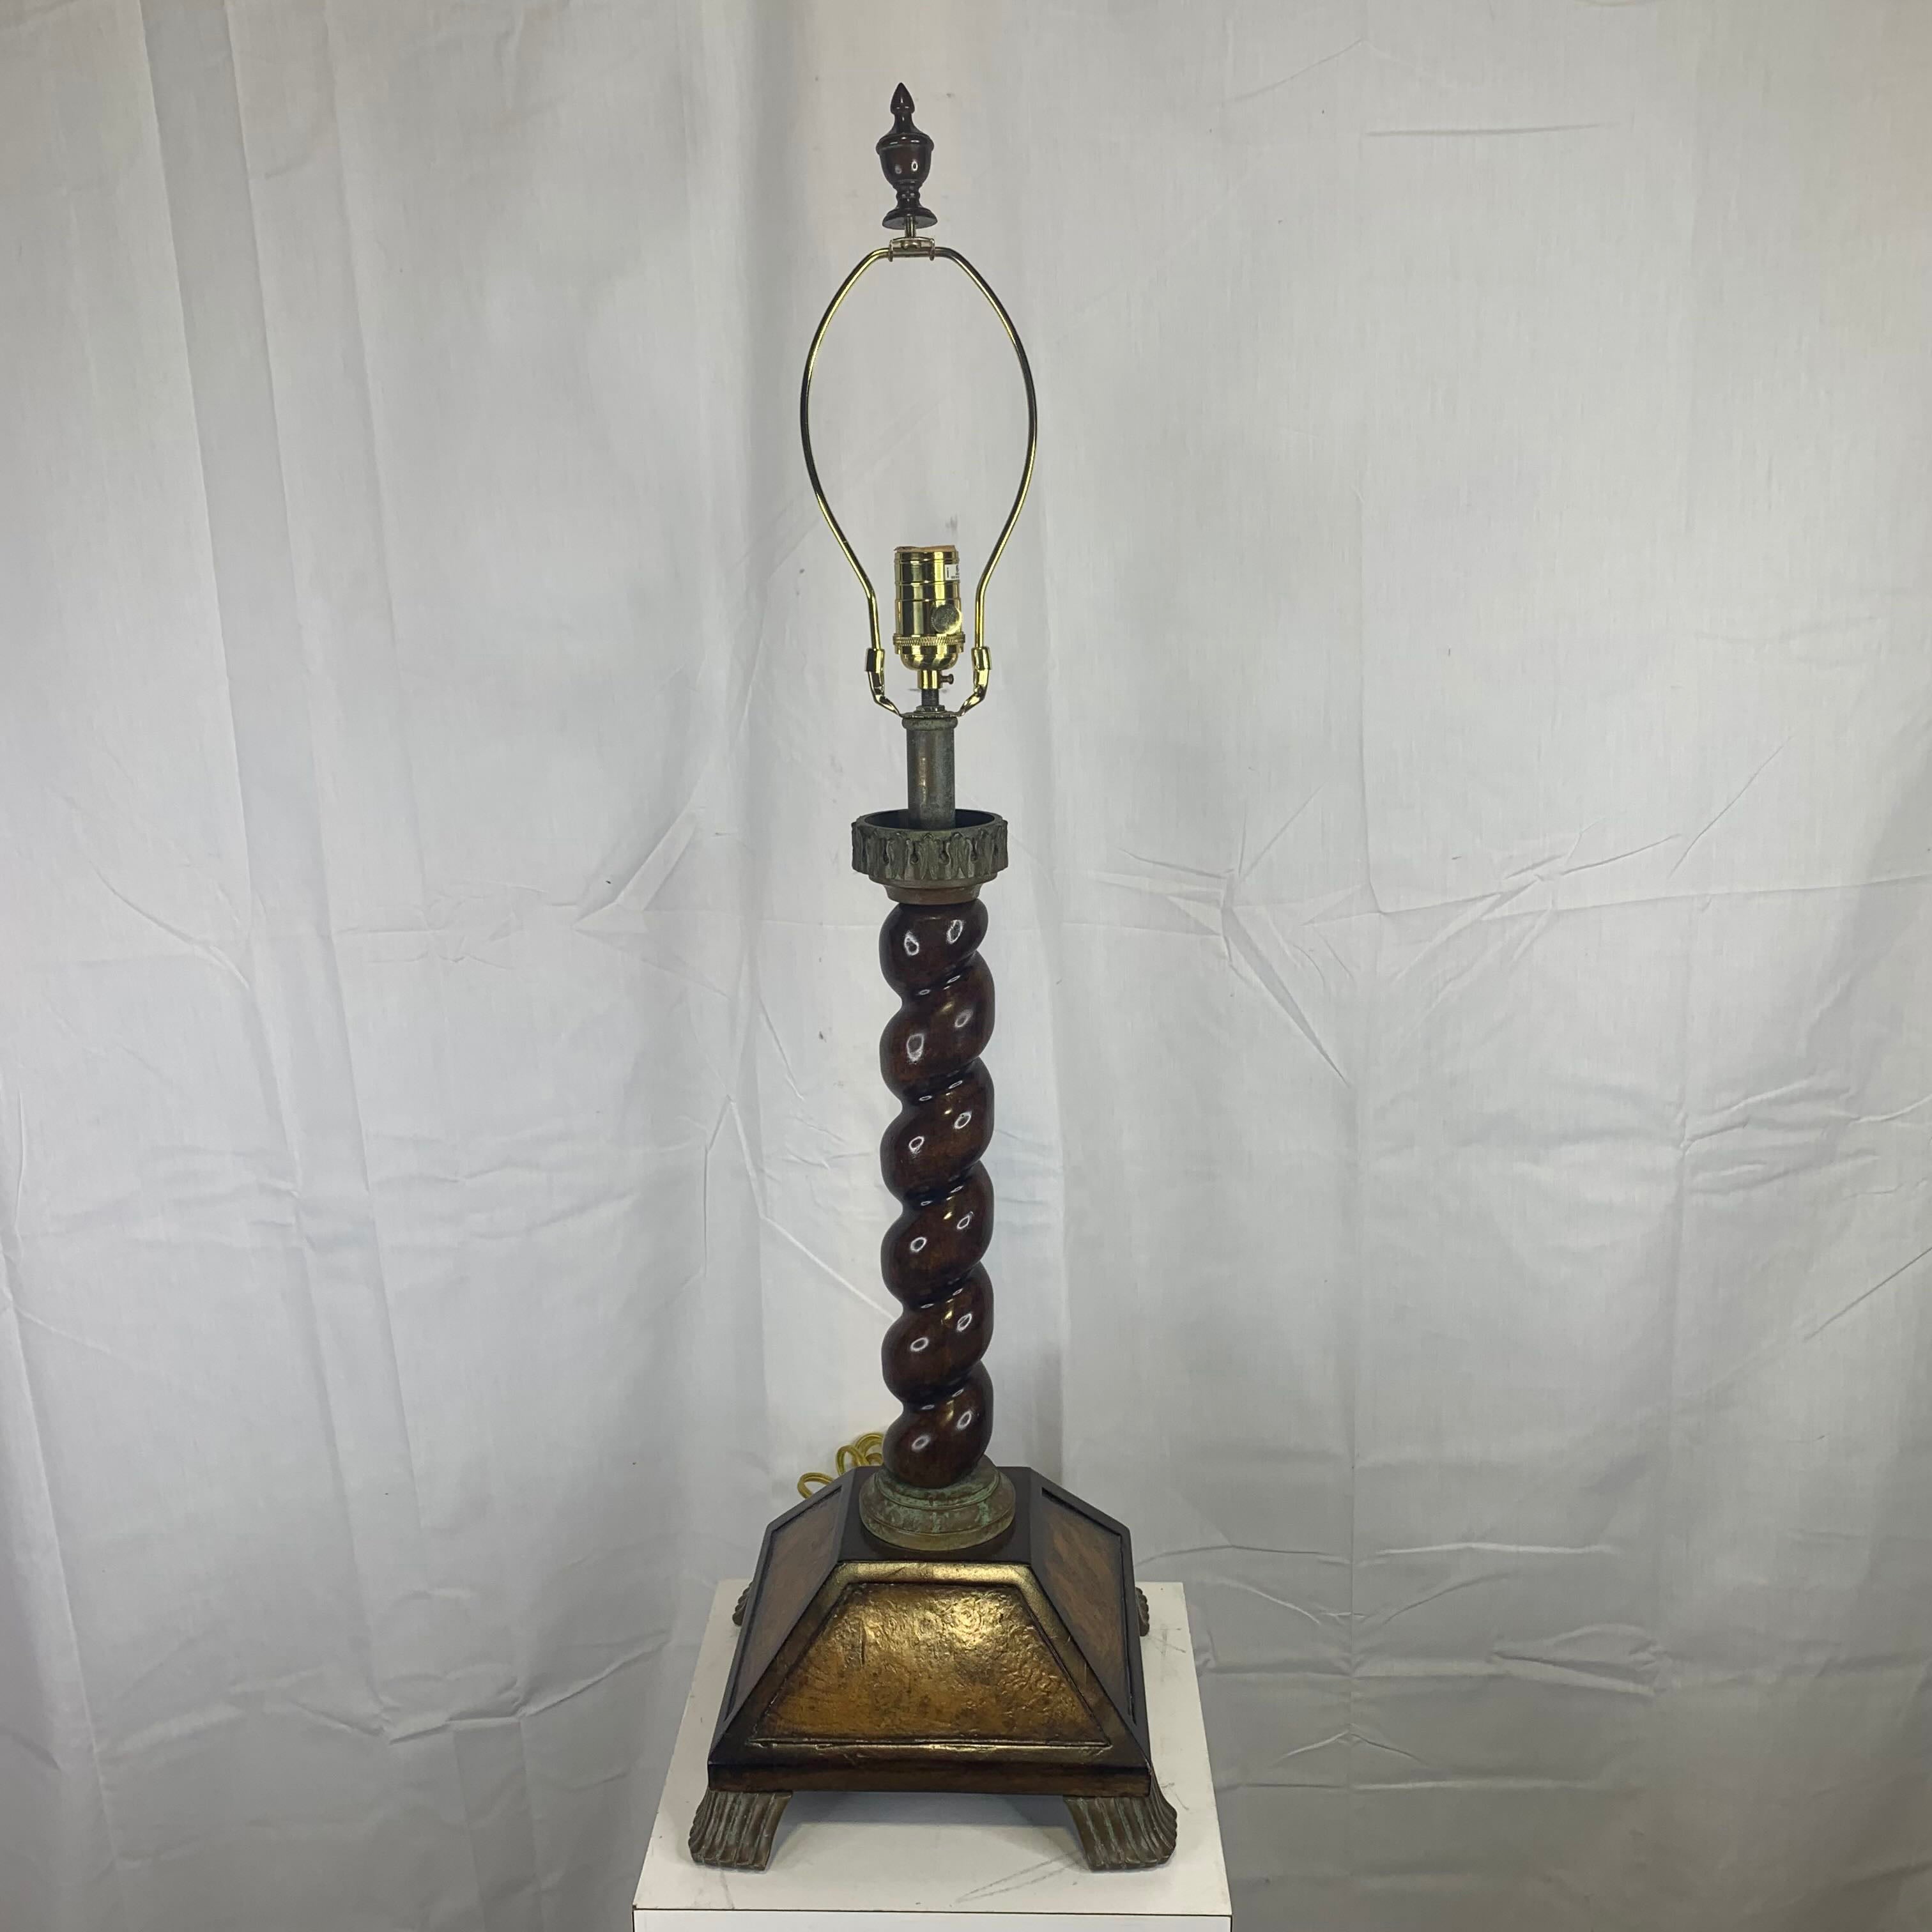 10"x 10"x 36" Vintage Swirl with Metal Accent Table Lamp